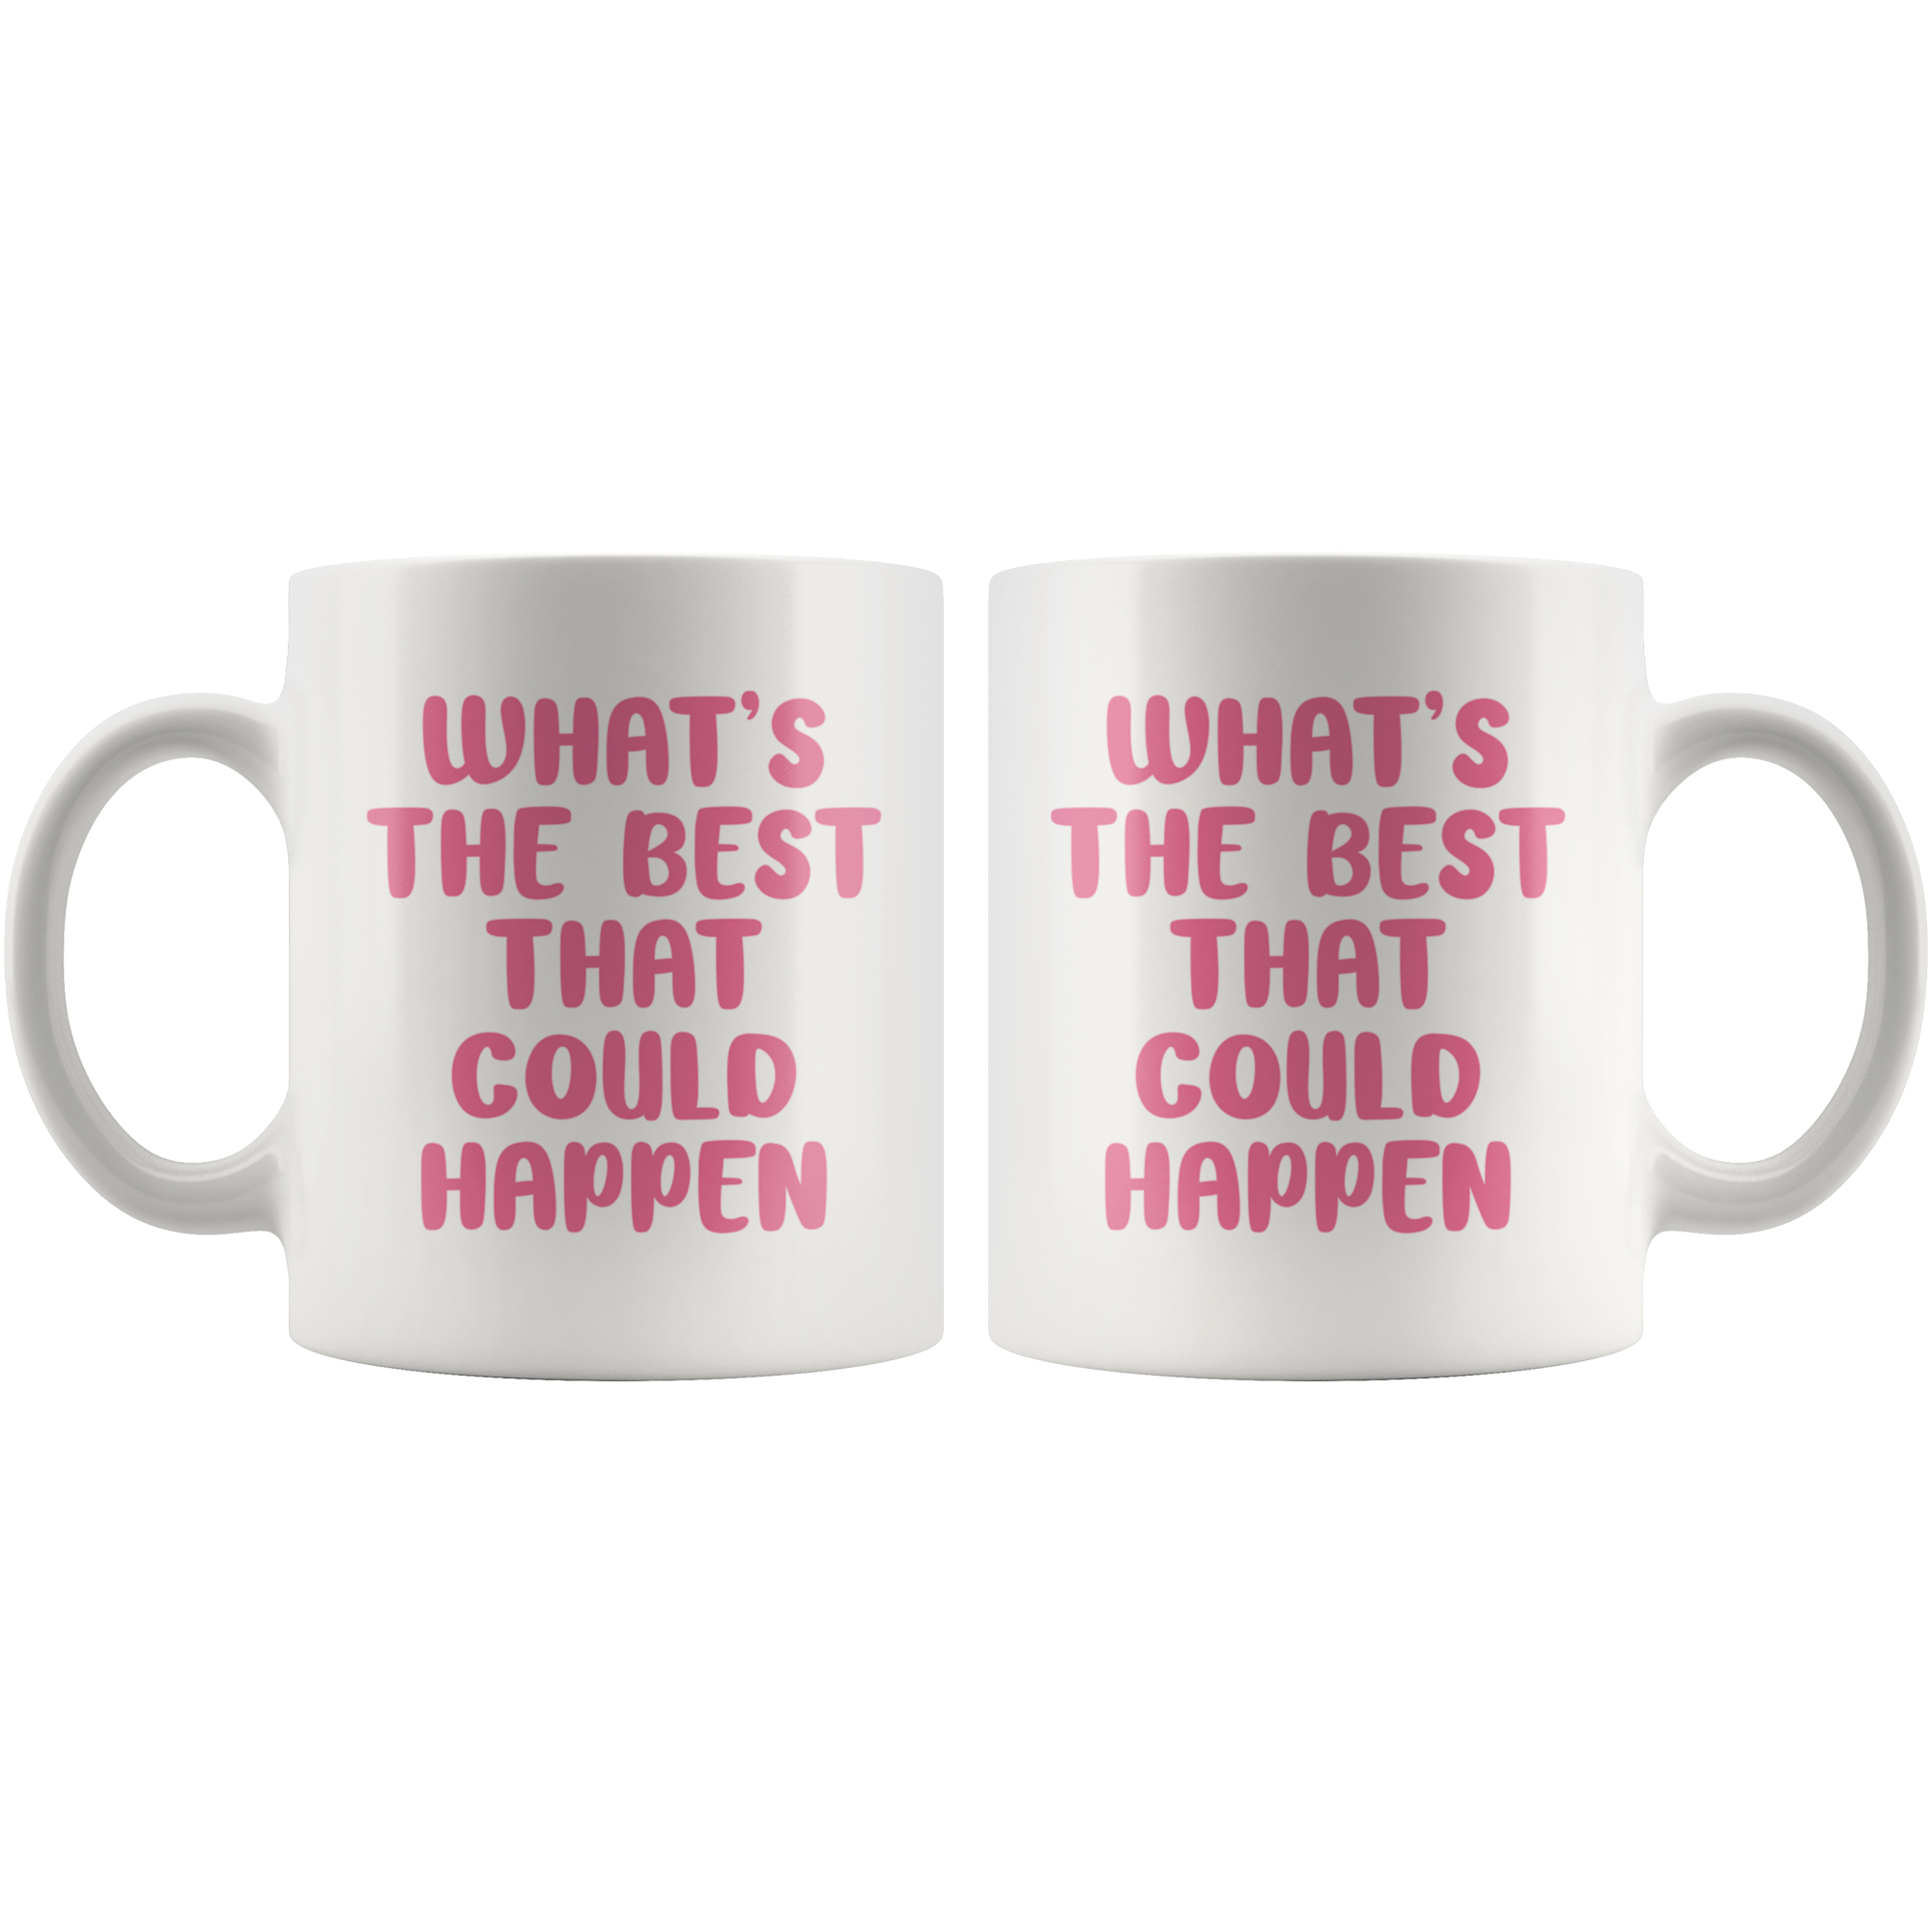 The Best That Could Happen Coffee Mug